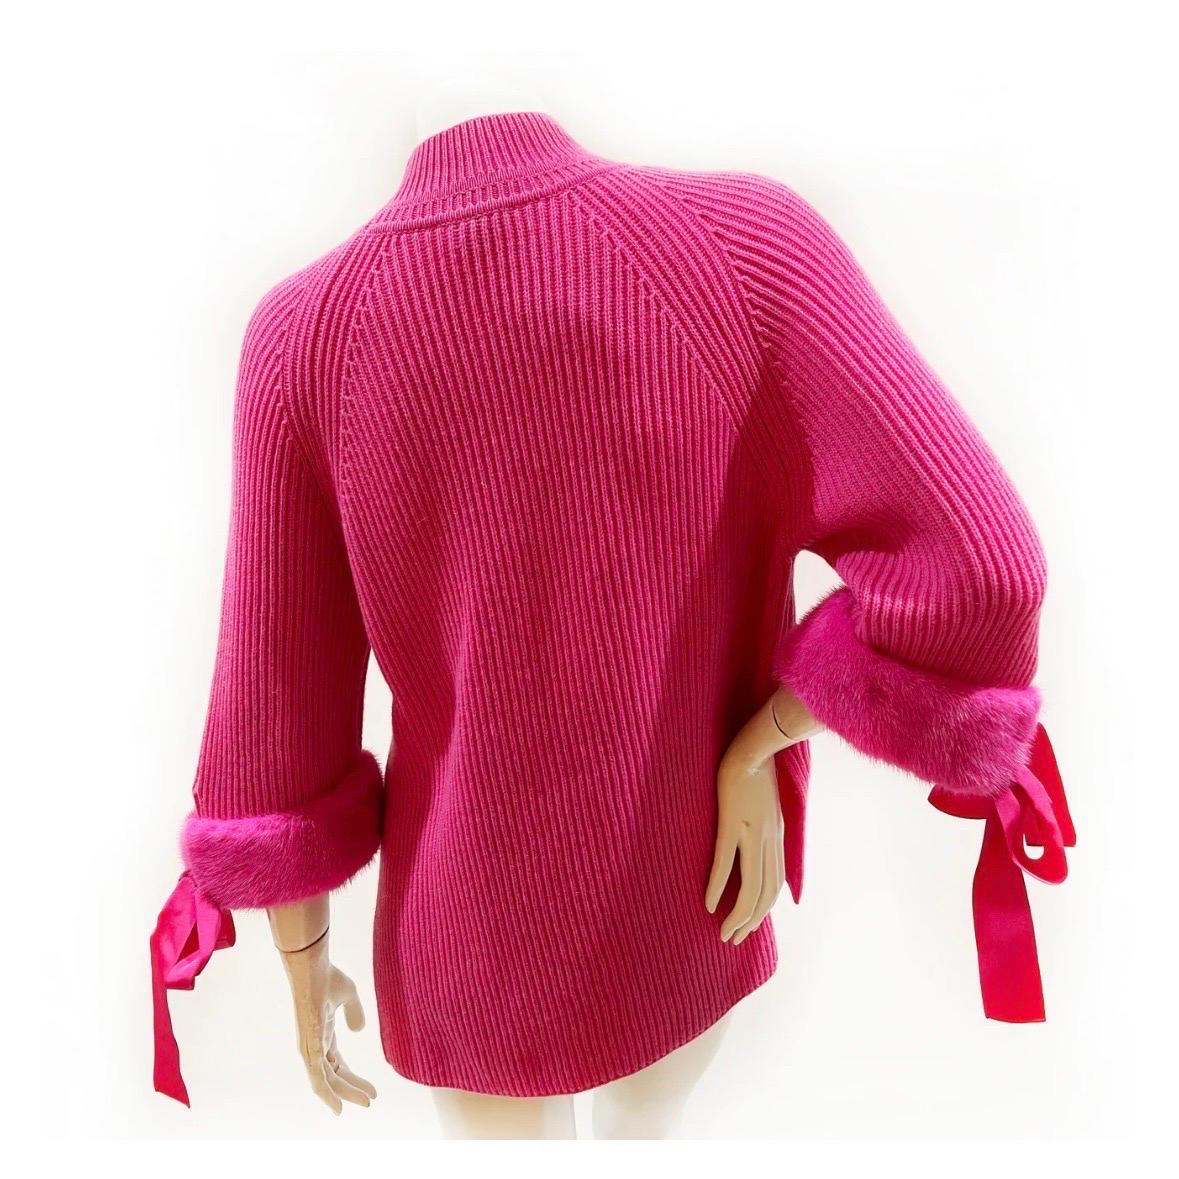 Hot Pink Cut-out Sweater by Fendi 
Spring/Summer 2018
Fendi knit sweater with neck cut-out
High Neck 
3/4 sleeves
Mink Fur cuffs with ribbon  
Pullover style
100% Cashmere
Made in Italy
Condition: Excellent, no visible signs of wear.